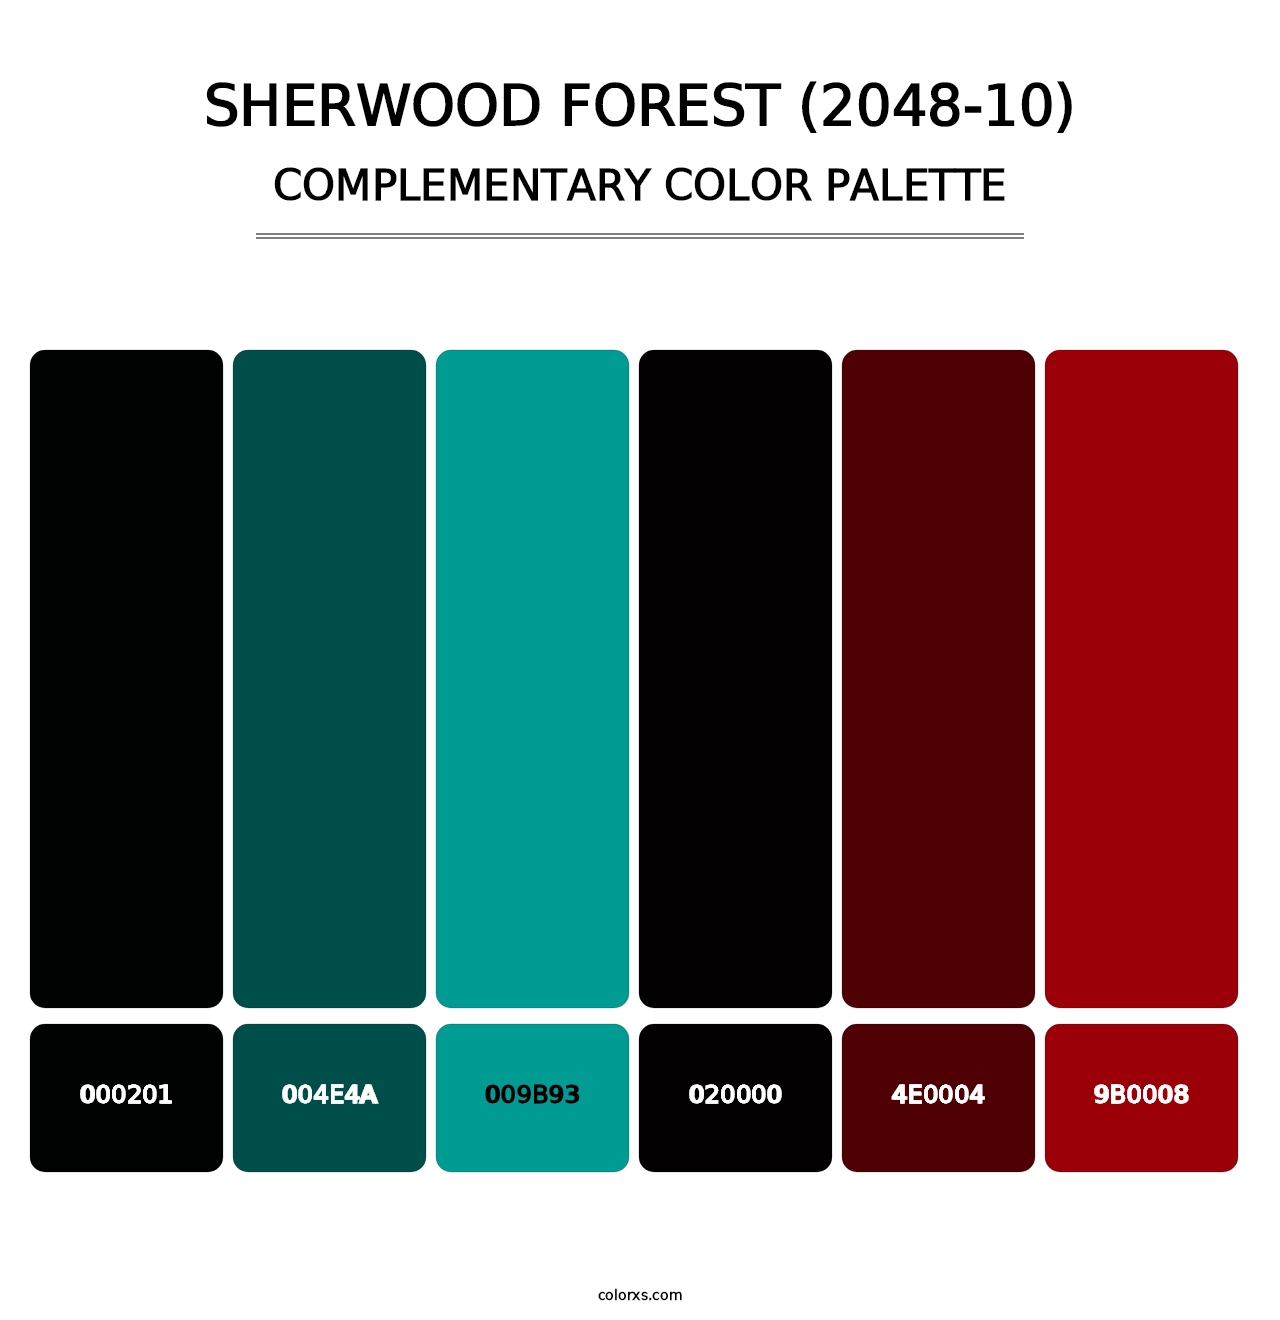 Sherwood Forest (2048-10) - Complementary Color Palette